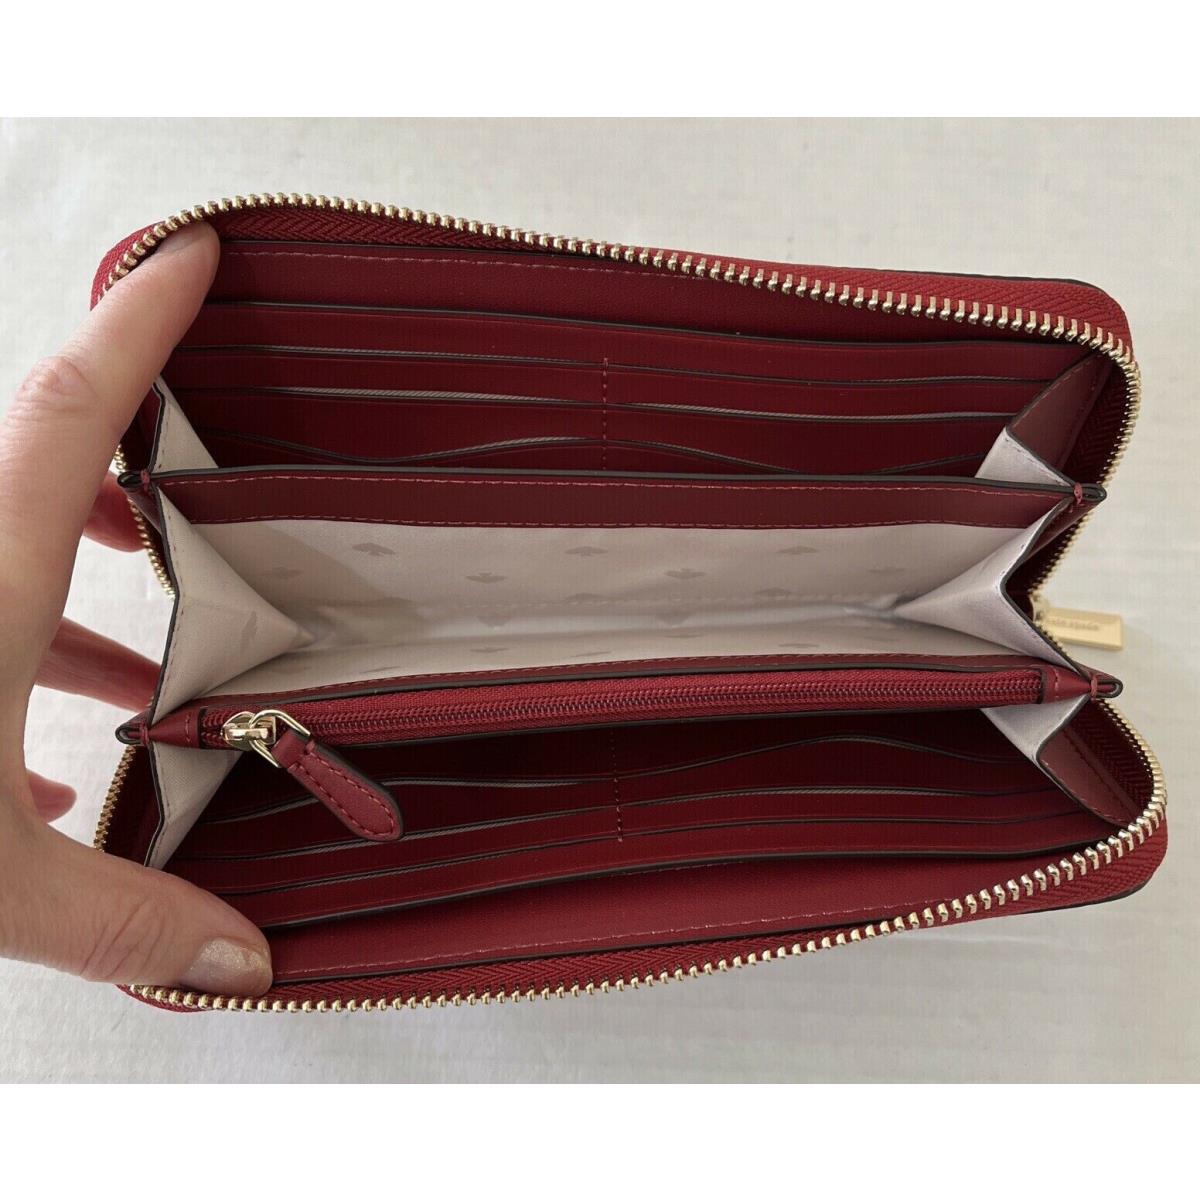 Kate Spade wallet  - Red Currant